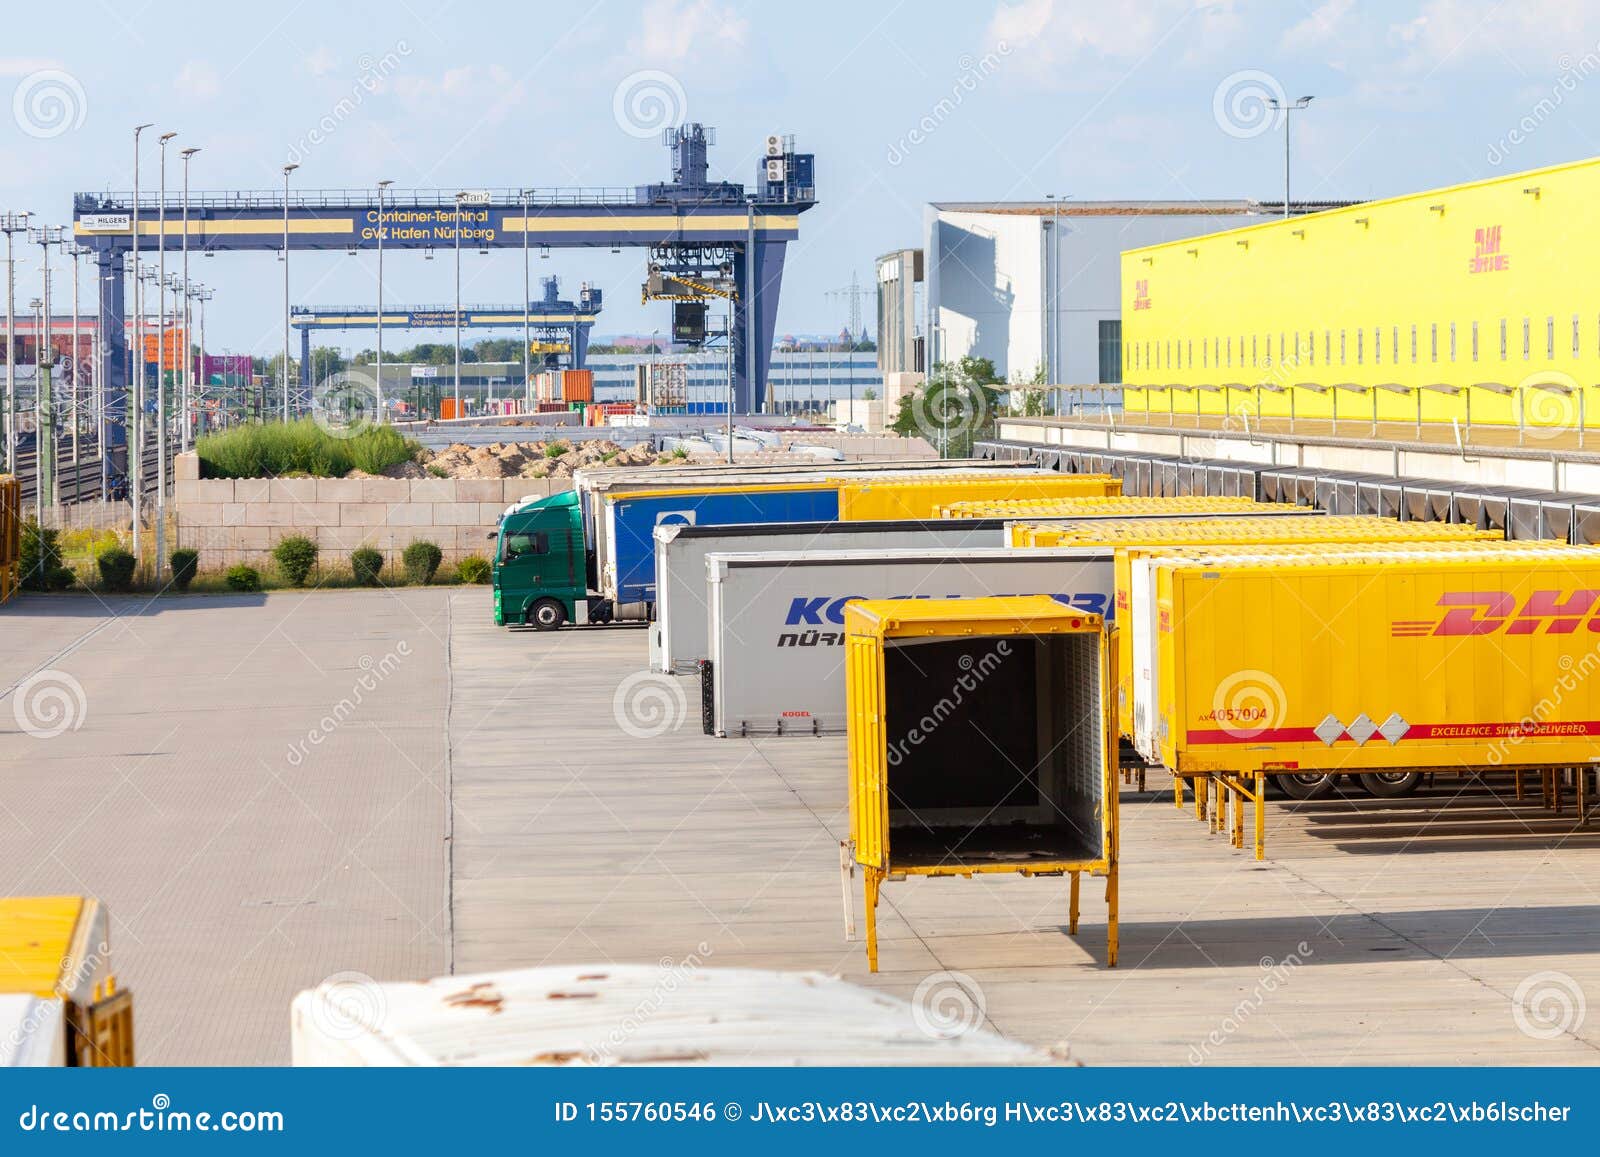 Freight Logisitc Center From International Courier, Parcel, And Express Mail Company DHL In ...